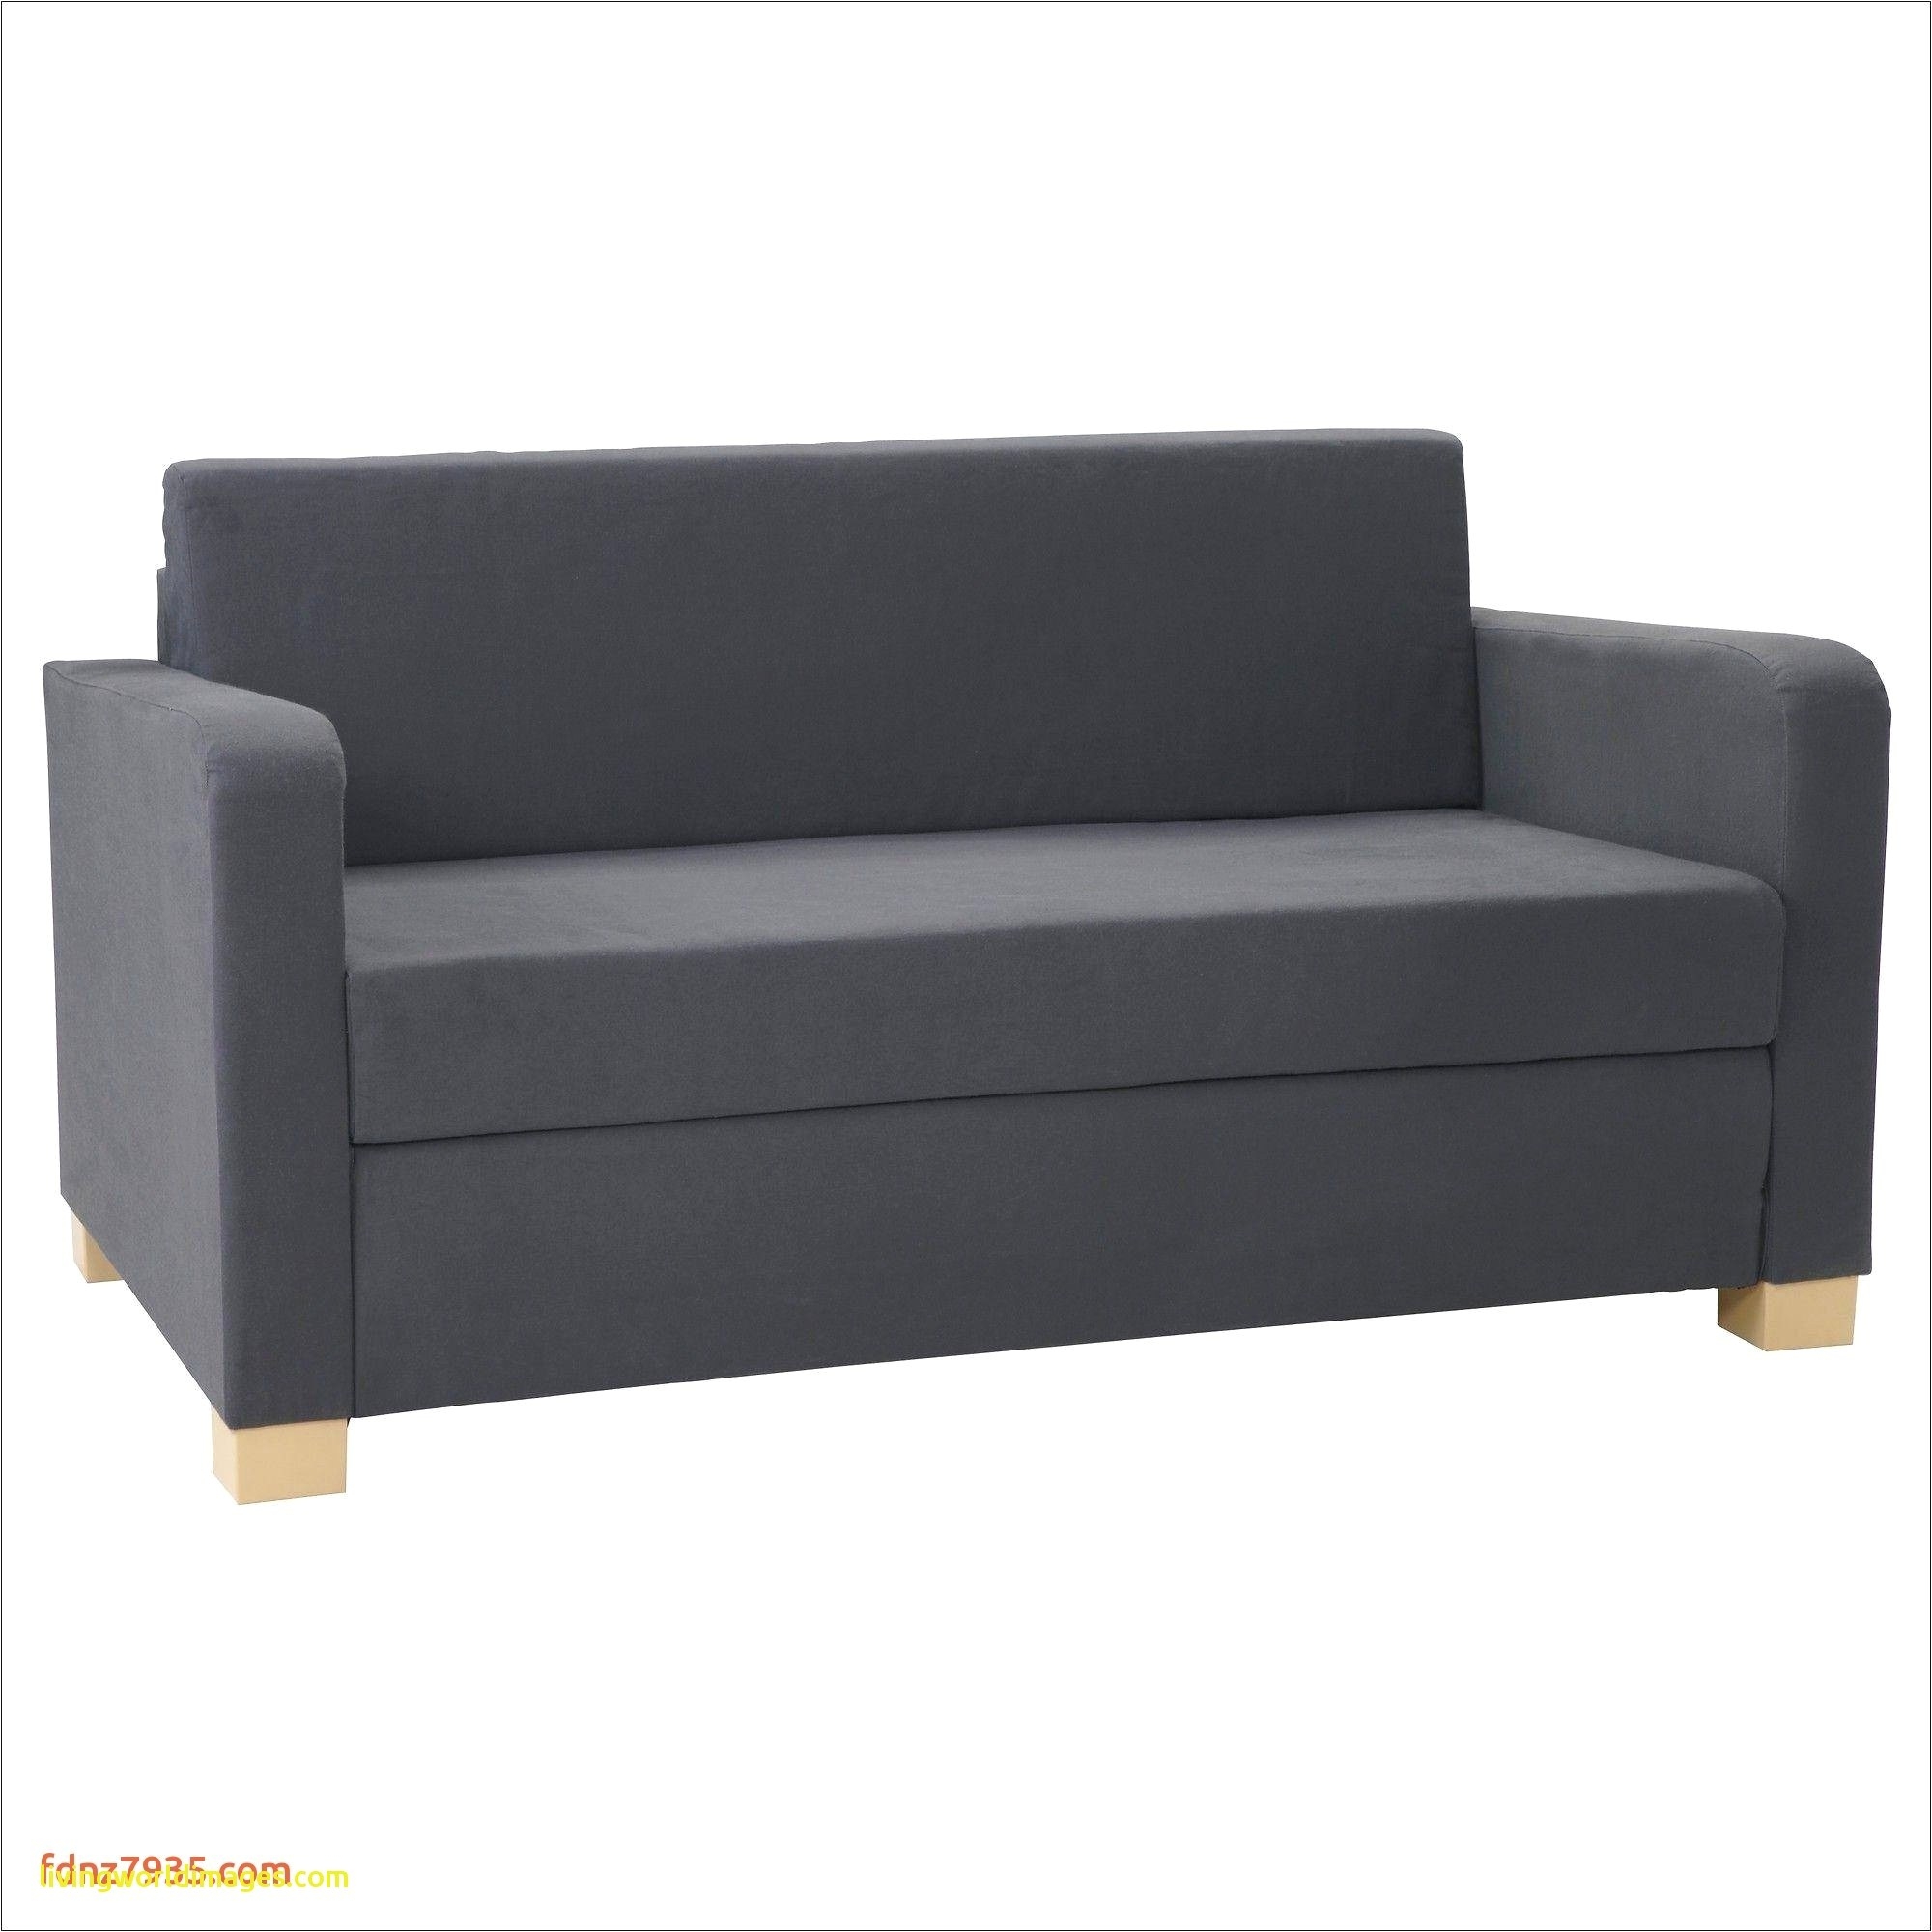 small sleeper sofa ikea terrific dining room chair covers ikea awesome small couches 0d tags